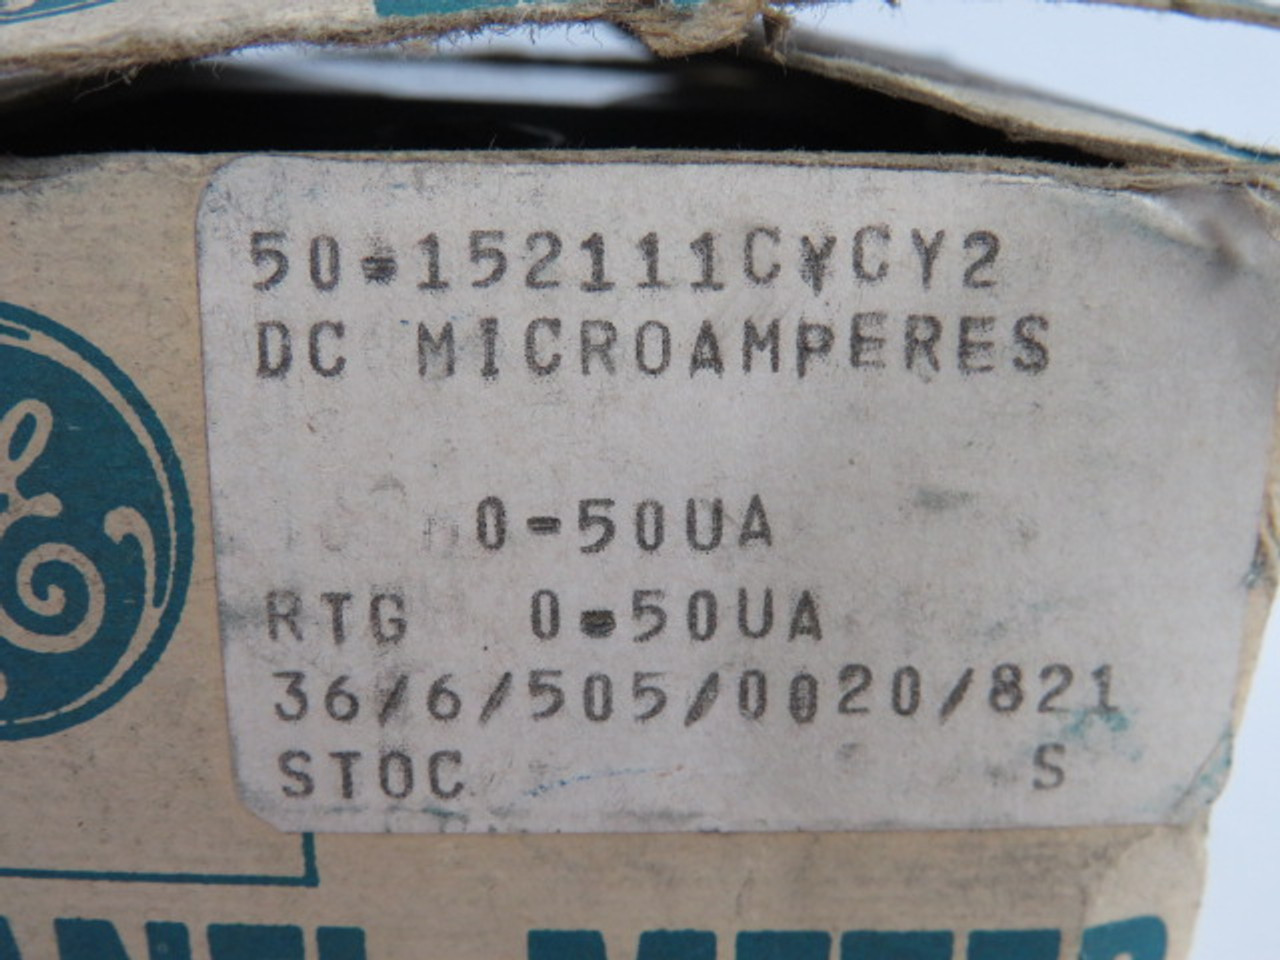 General Electric 50-152111CYCY2 Panel Meter 0-50DC Microamperes ! NEW !